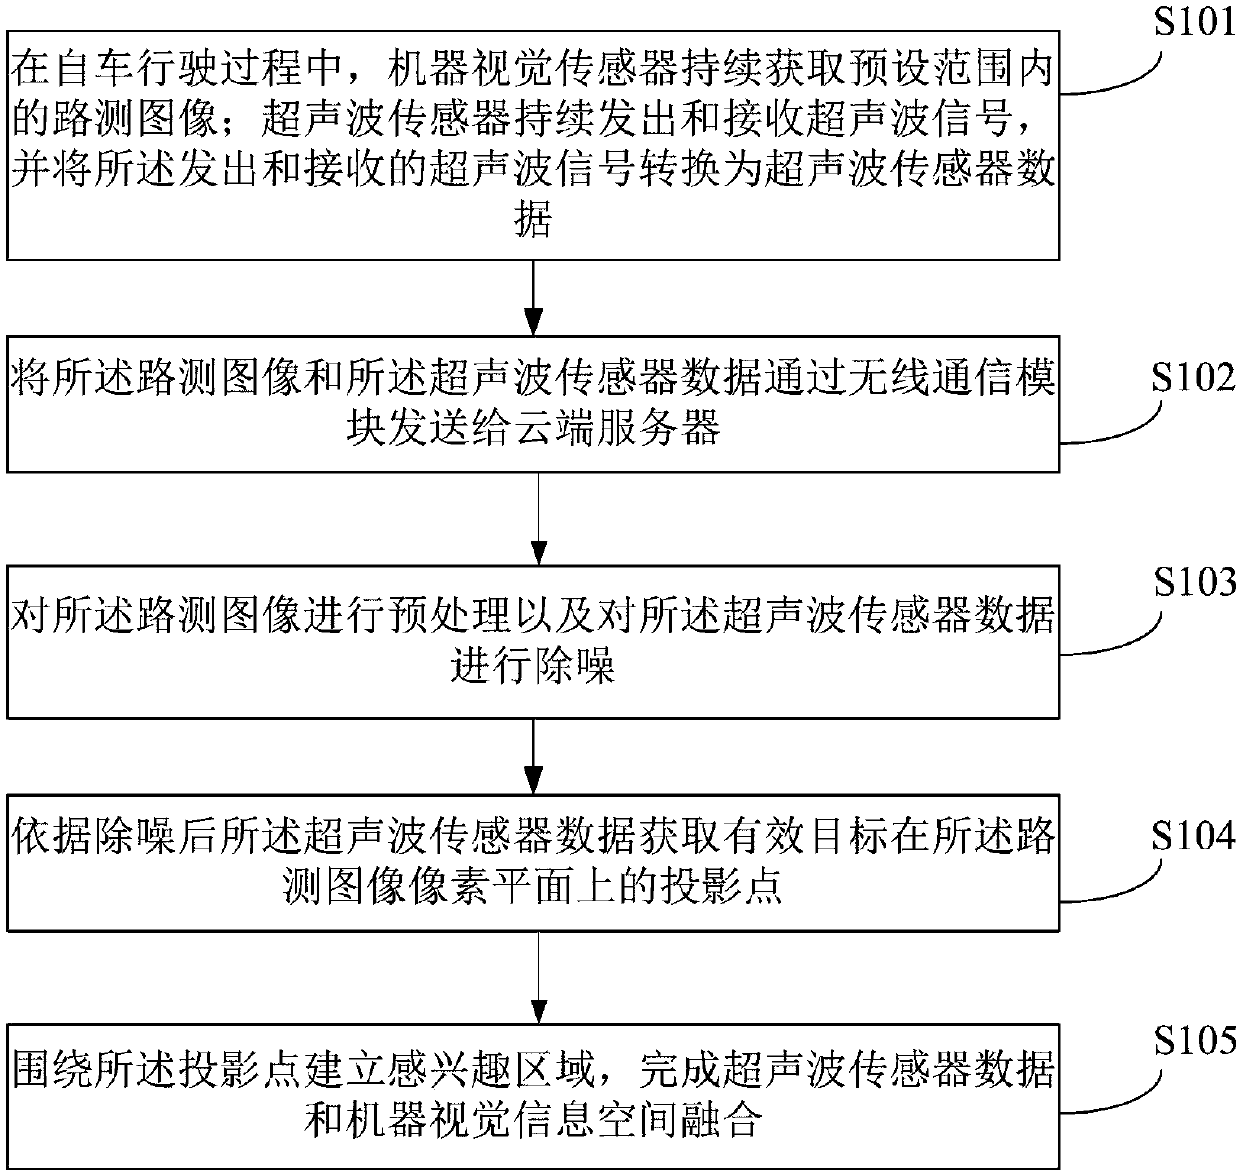 Roadside information fusion method and system